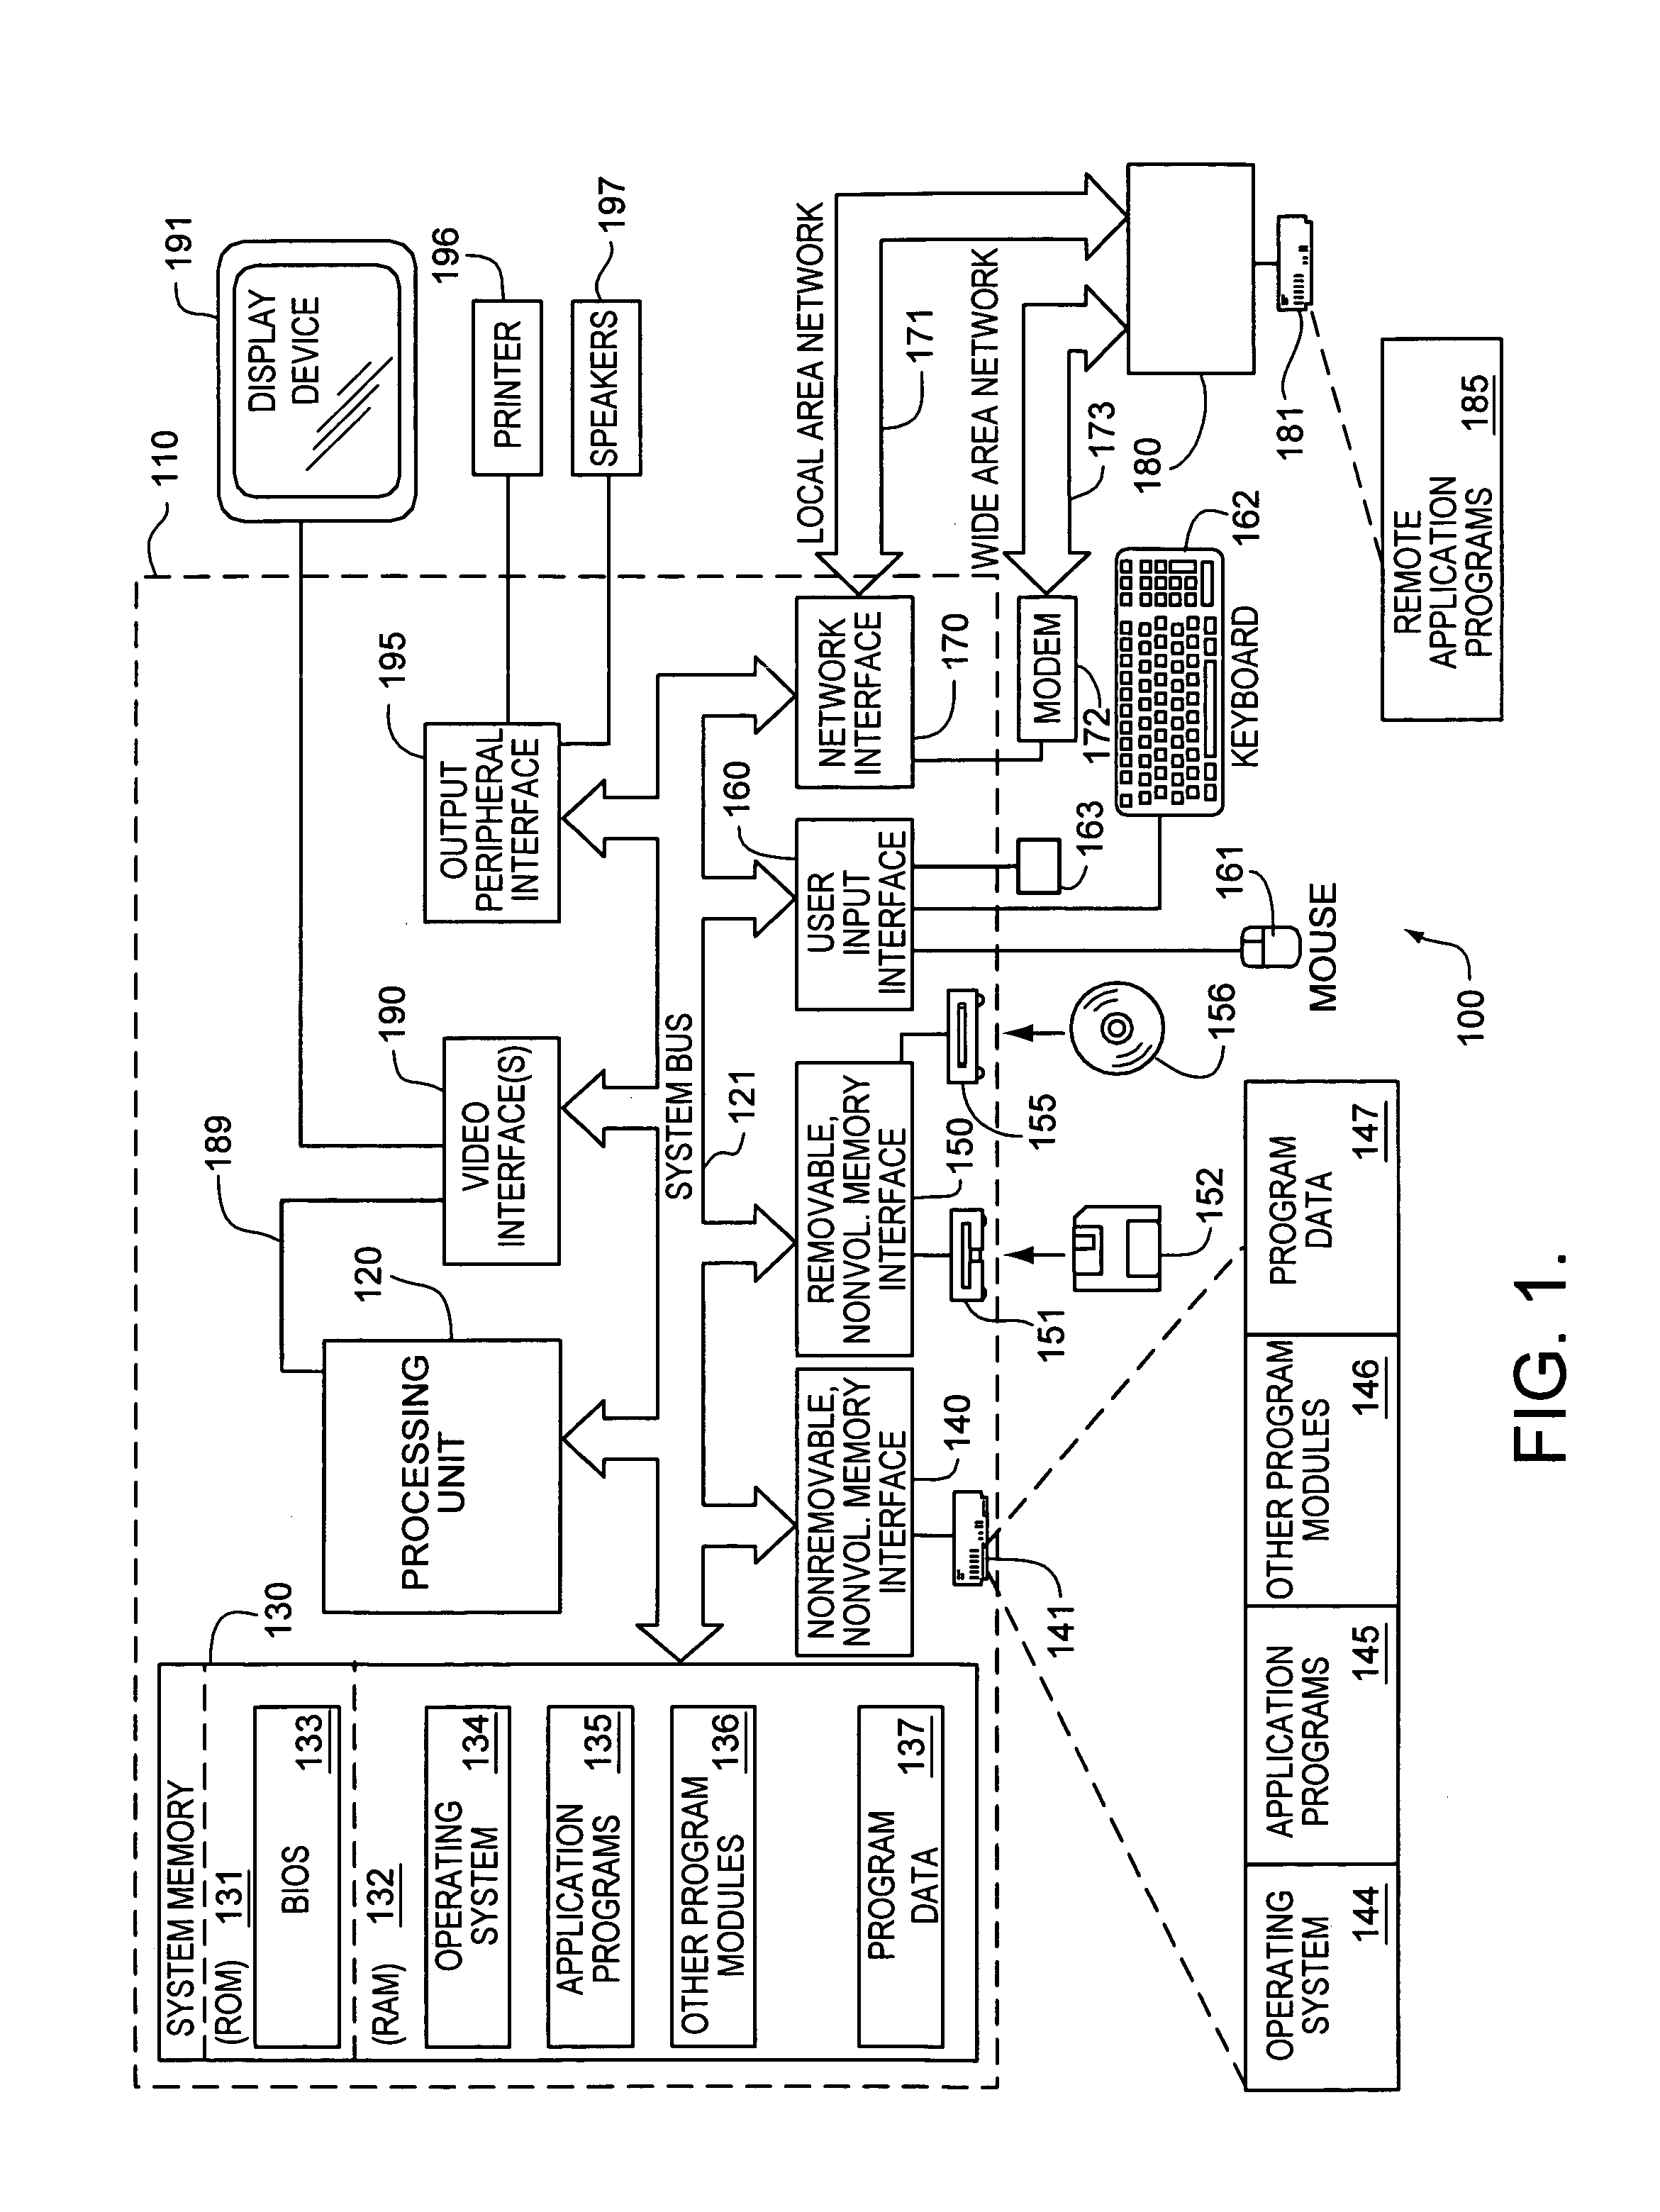 System and method for locating and presenting electronic documents to a user